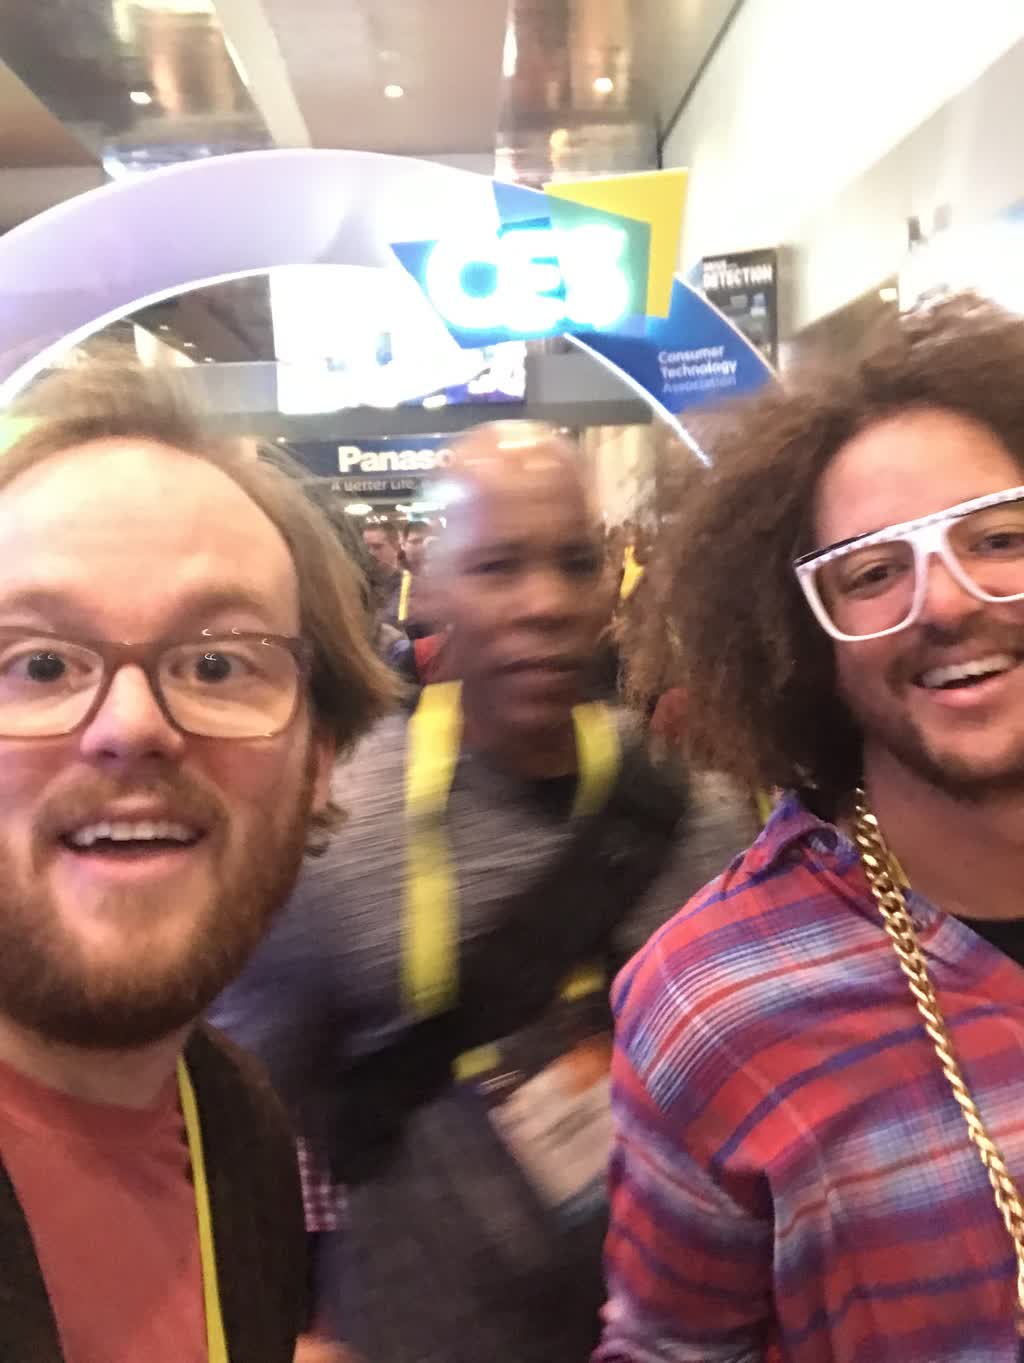 A picture of Peter with Redfoo